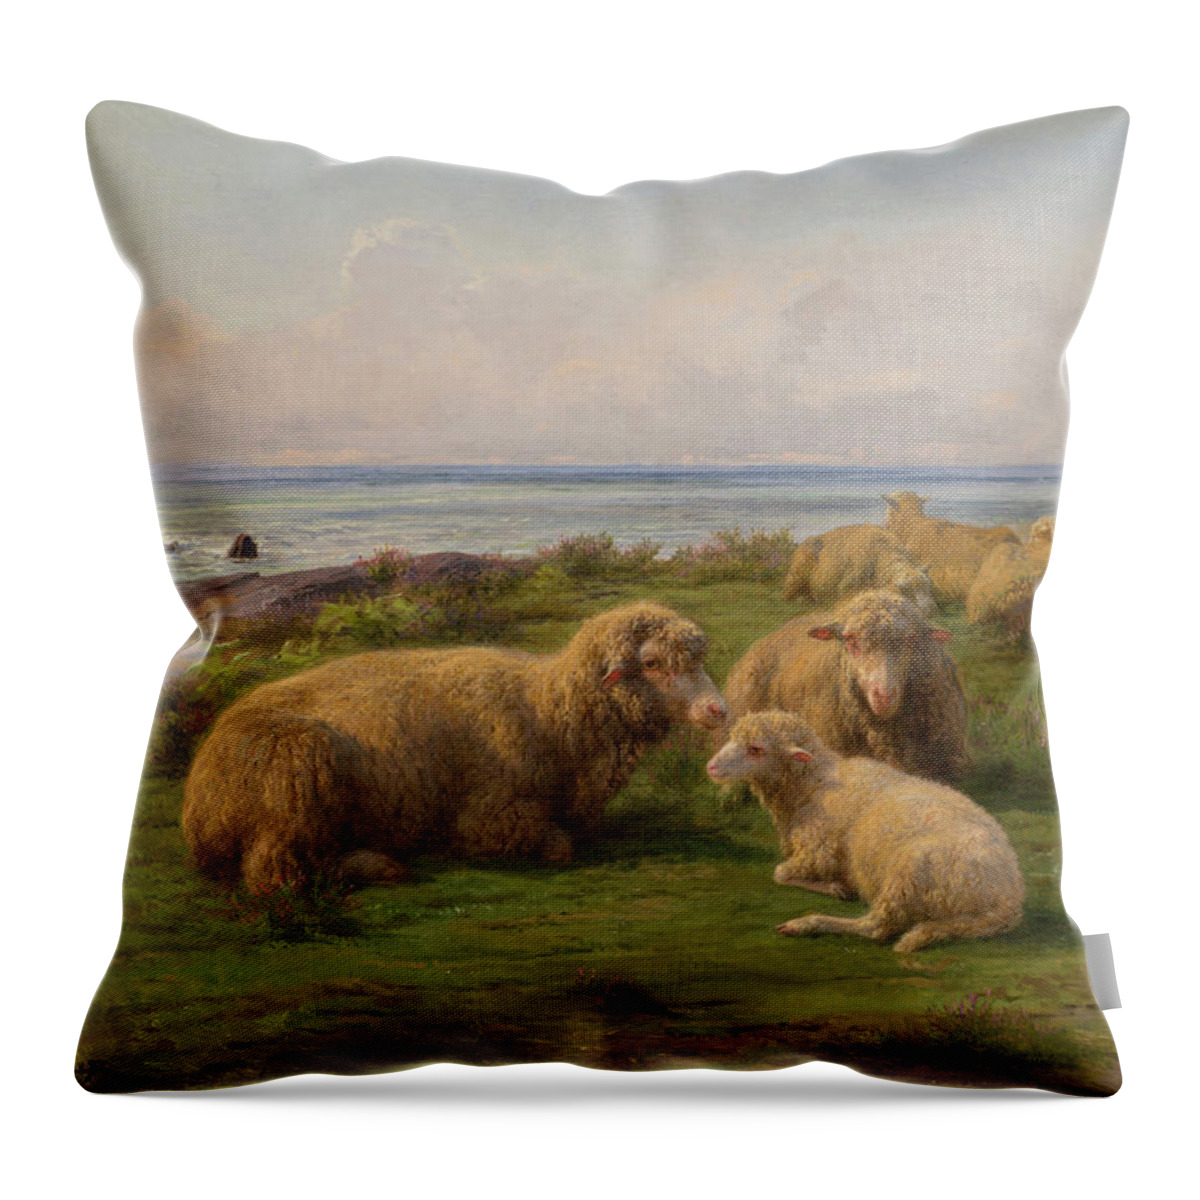 Sheep By The Sea Throw Pillow featuring the painting Sheep by the Sea #1 by Rosa Bonheur